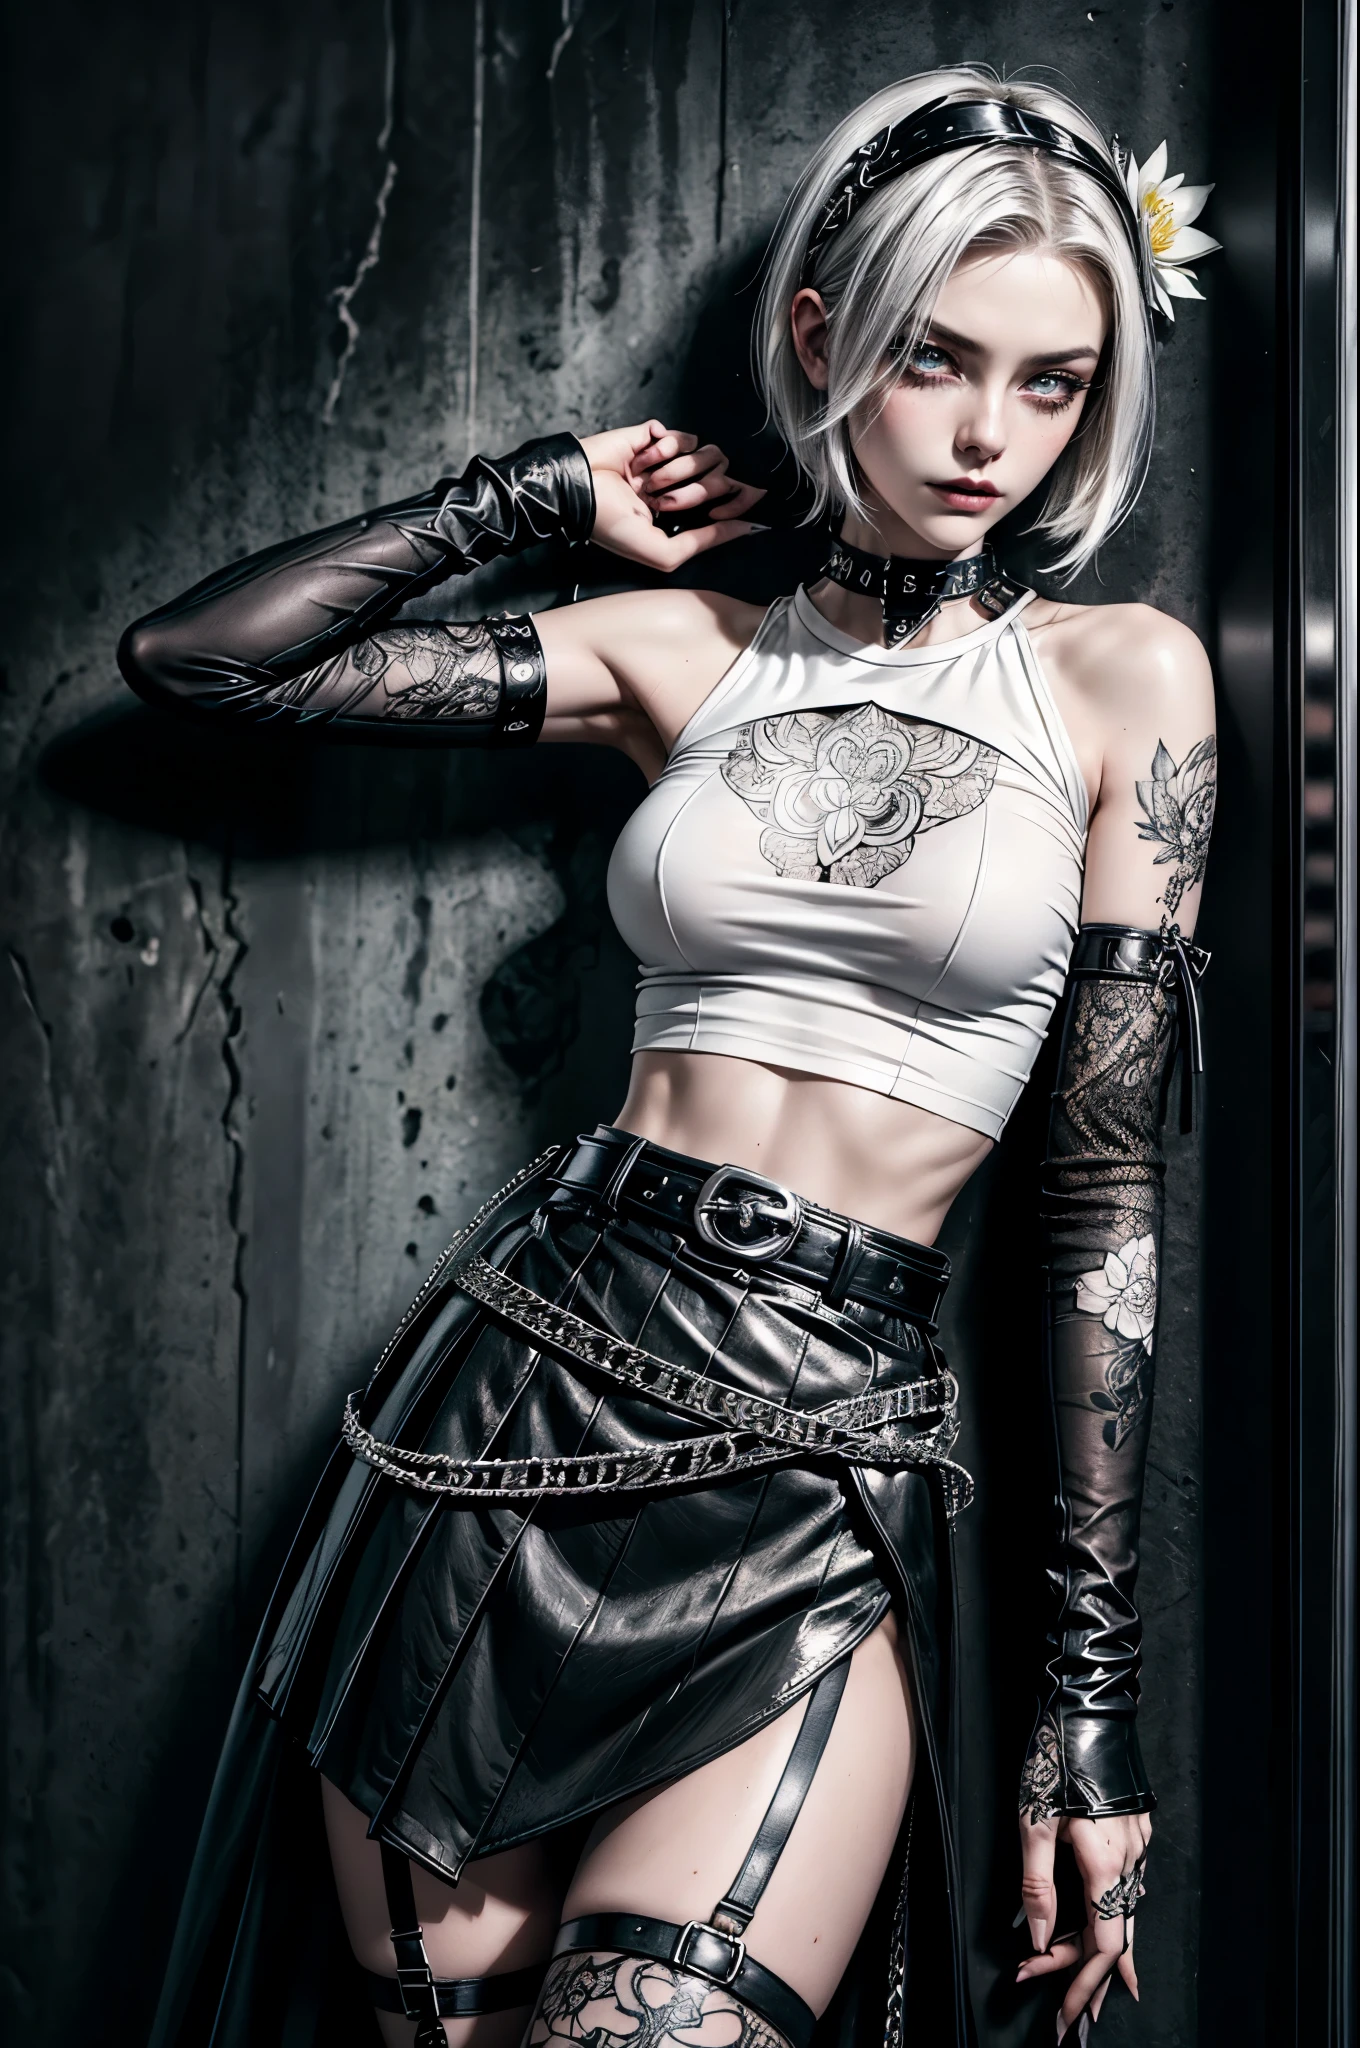 (Detailed illustrations, Very detailed and detailed drawing, Delicate lines with slow and rapid, Realistic texture expression), One woman with very short white hair with black tips, ( emo hairstyle, ), goth, pale white skin, evil smirk, (girls bedroom background), dark lighting, cold atmosphere, lore_Emma , pink eyes , dark eyeliner, (ultra dark glossy black lipstick), bored expression, gorgeous face , super cute, 18 years old , hyper detailed face, (super skinny figure , medium breast, thin waist), back leaning against wall, slim legs, slim hips, LowriseXL, (ultra low rise wet look shiny leather skirt with transparent flower pattern), (mesh shirt with flower pattern under (white transparent loose silk t-shirt) with bare shoulders), black choker, vulva tattoo, black hairband, (white lotus flower in hair), ((flower pattern tattoo)), fingerless leather gloves, (black nail polish), faded tattoo's, ((thigh belt)), ((hip chains)), ((belt hanging on hip)), ((many studded belts)), (((right arm back against wall))), (((left hand behind head)))